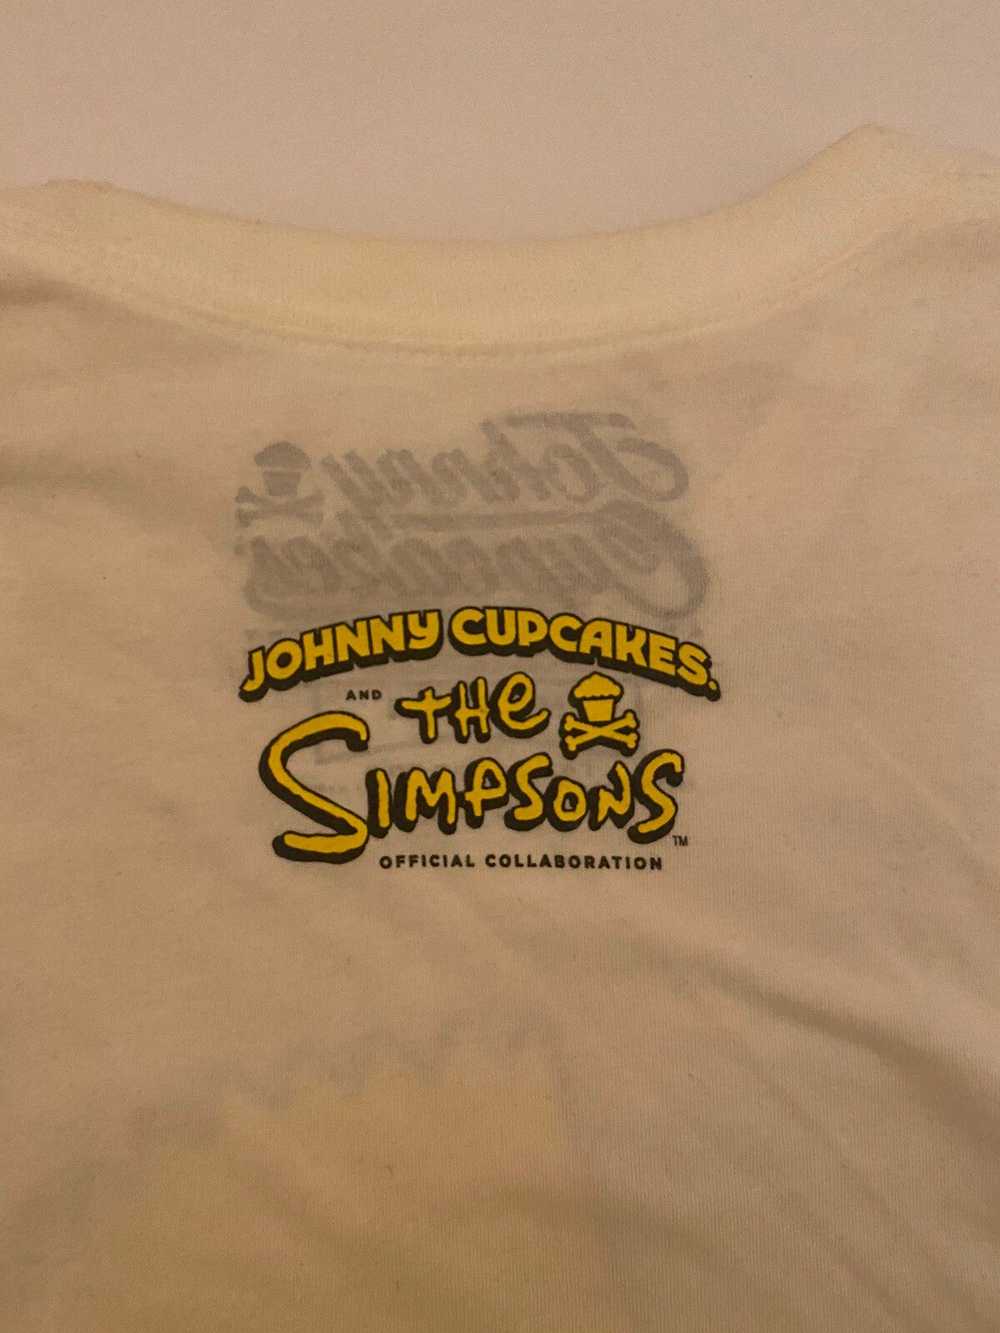 Johnny Cupcakes Johnny Cupcakes x The Simpsons - image 2